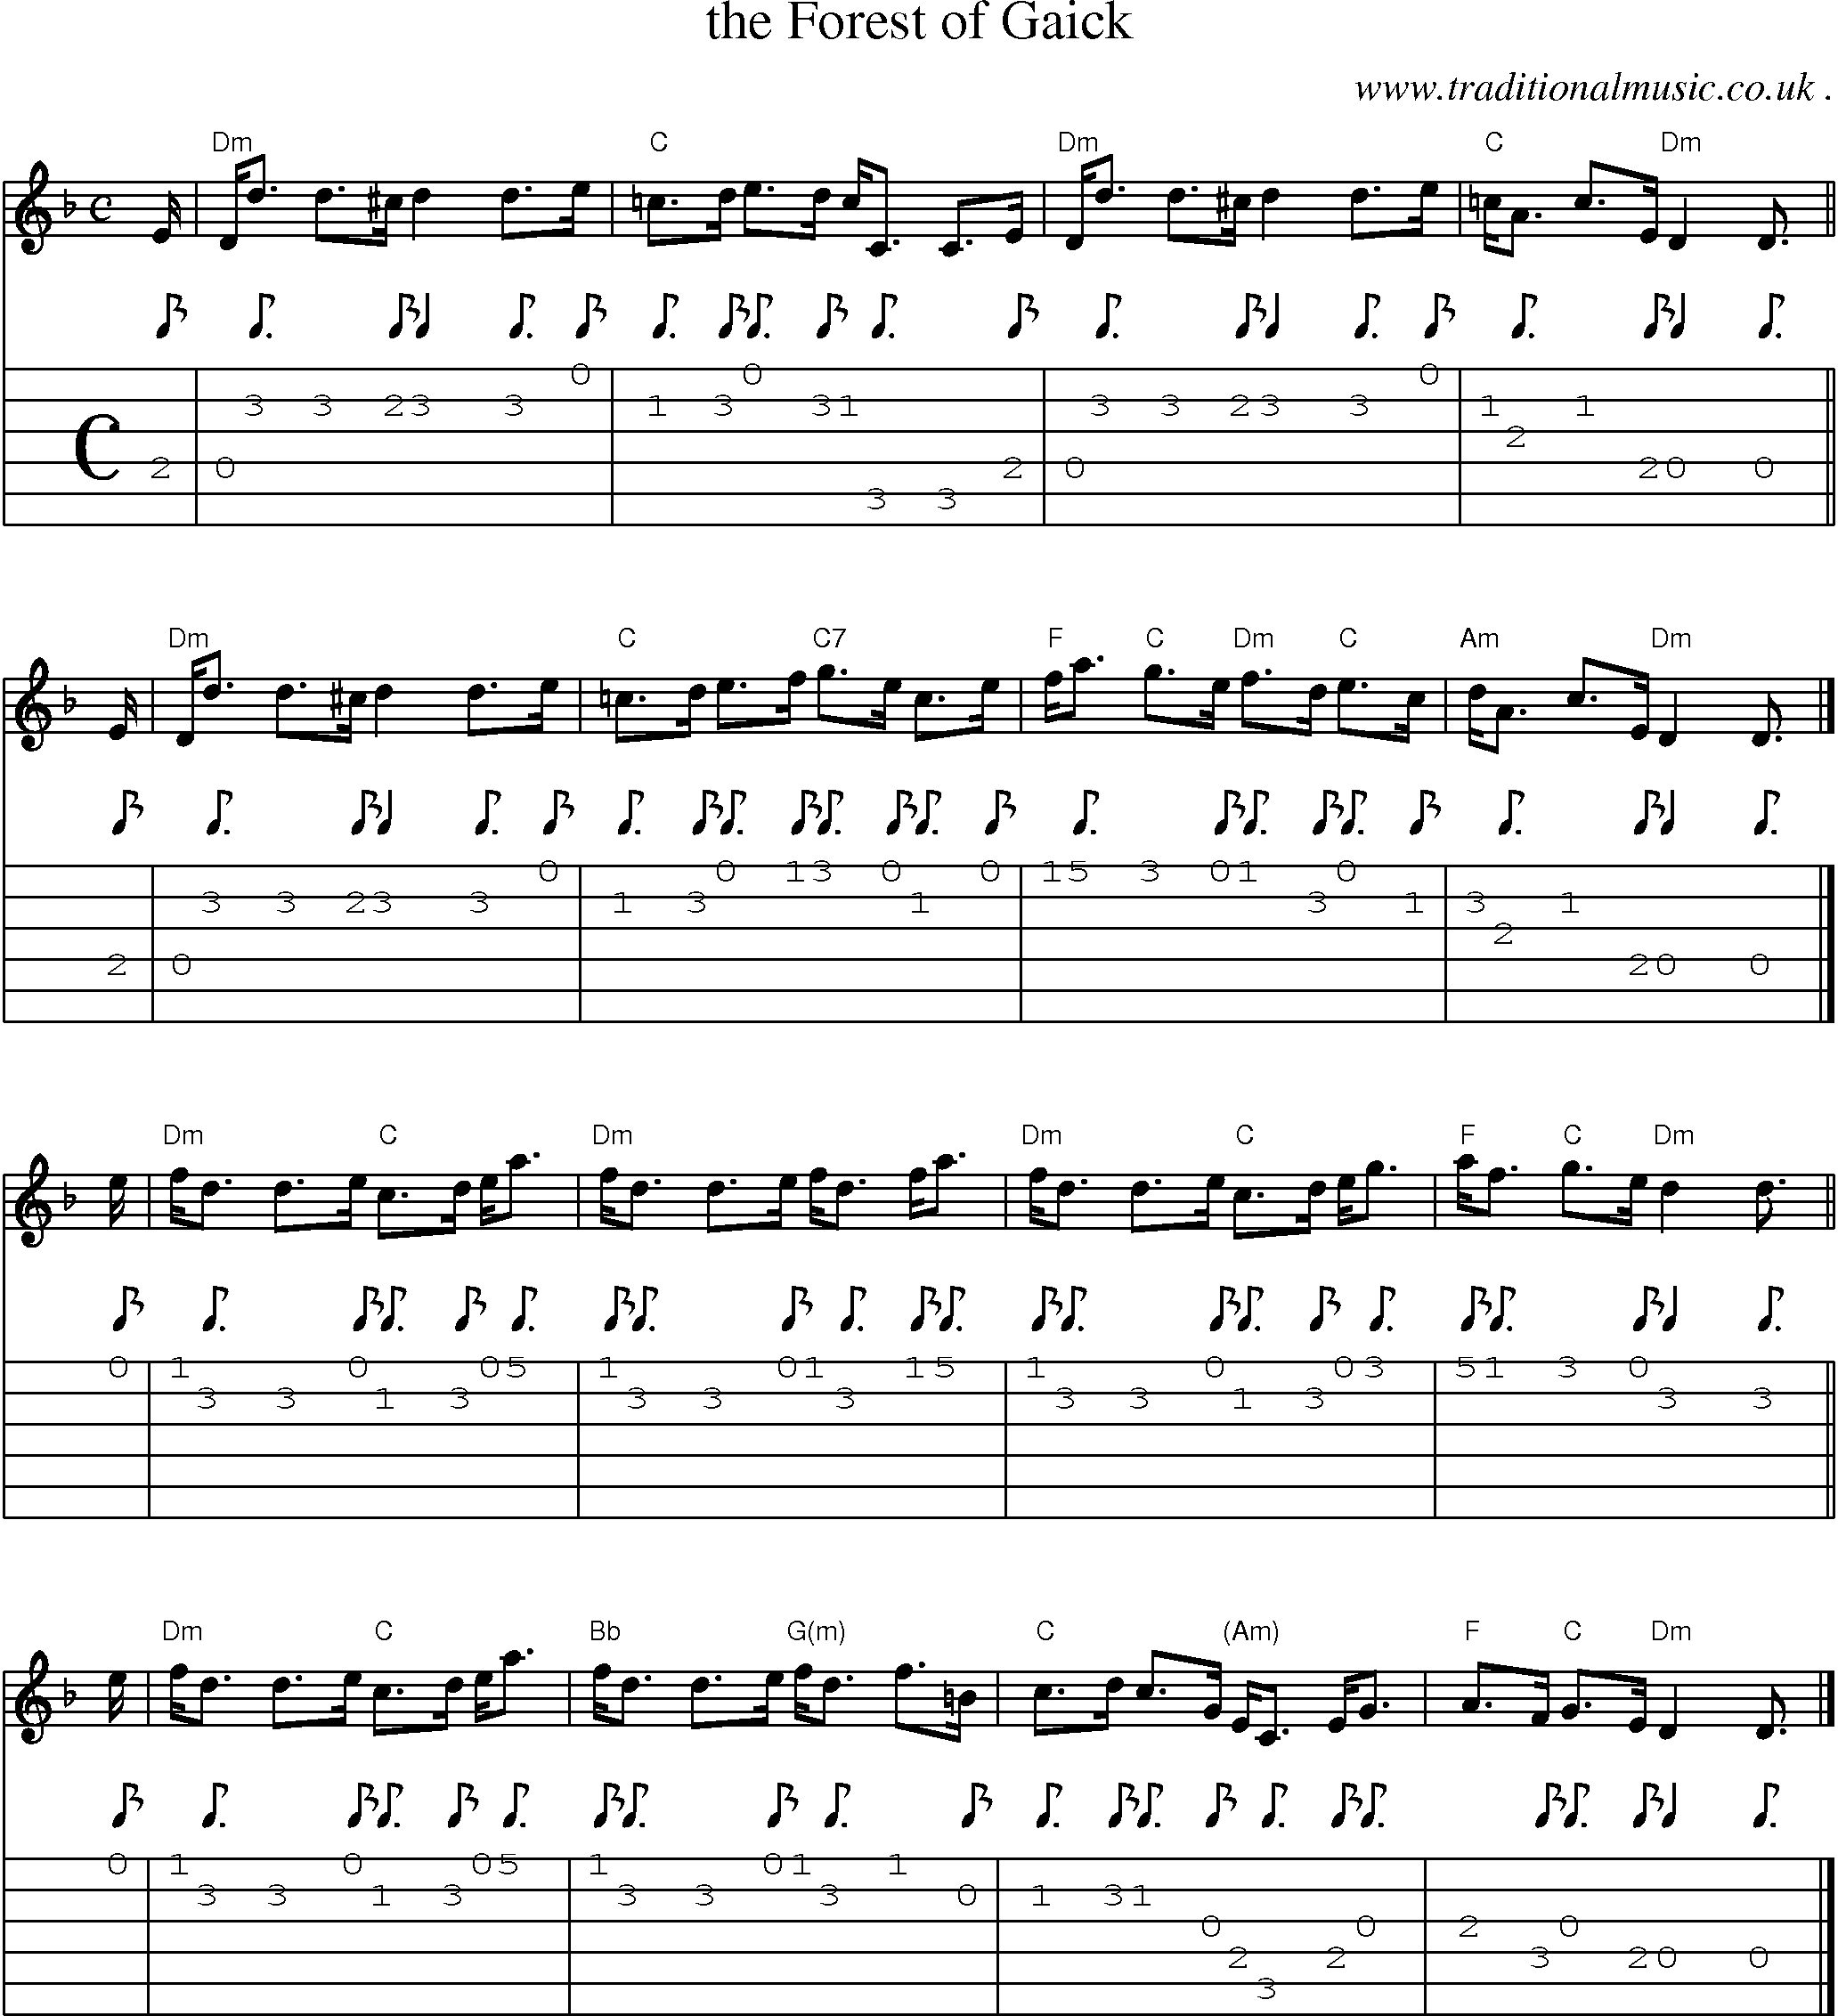 Sheet-music  score, Chords and Guitar Tabs for The Forest Of Gaick